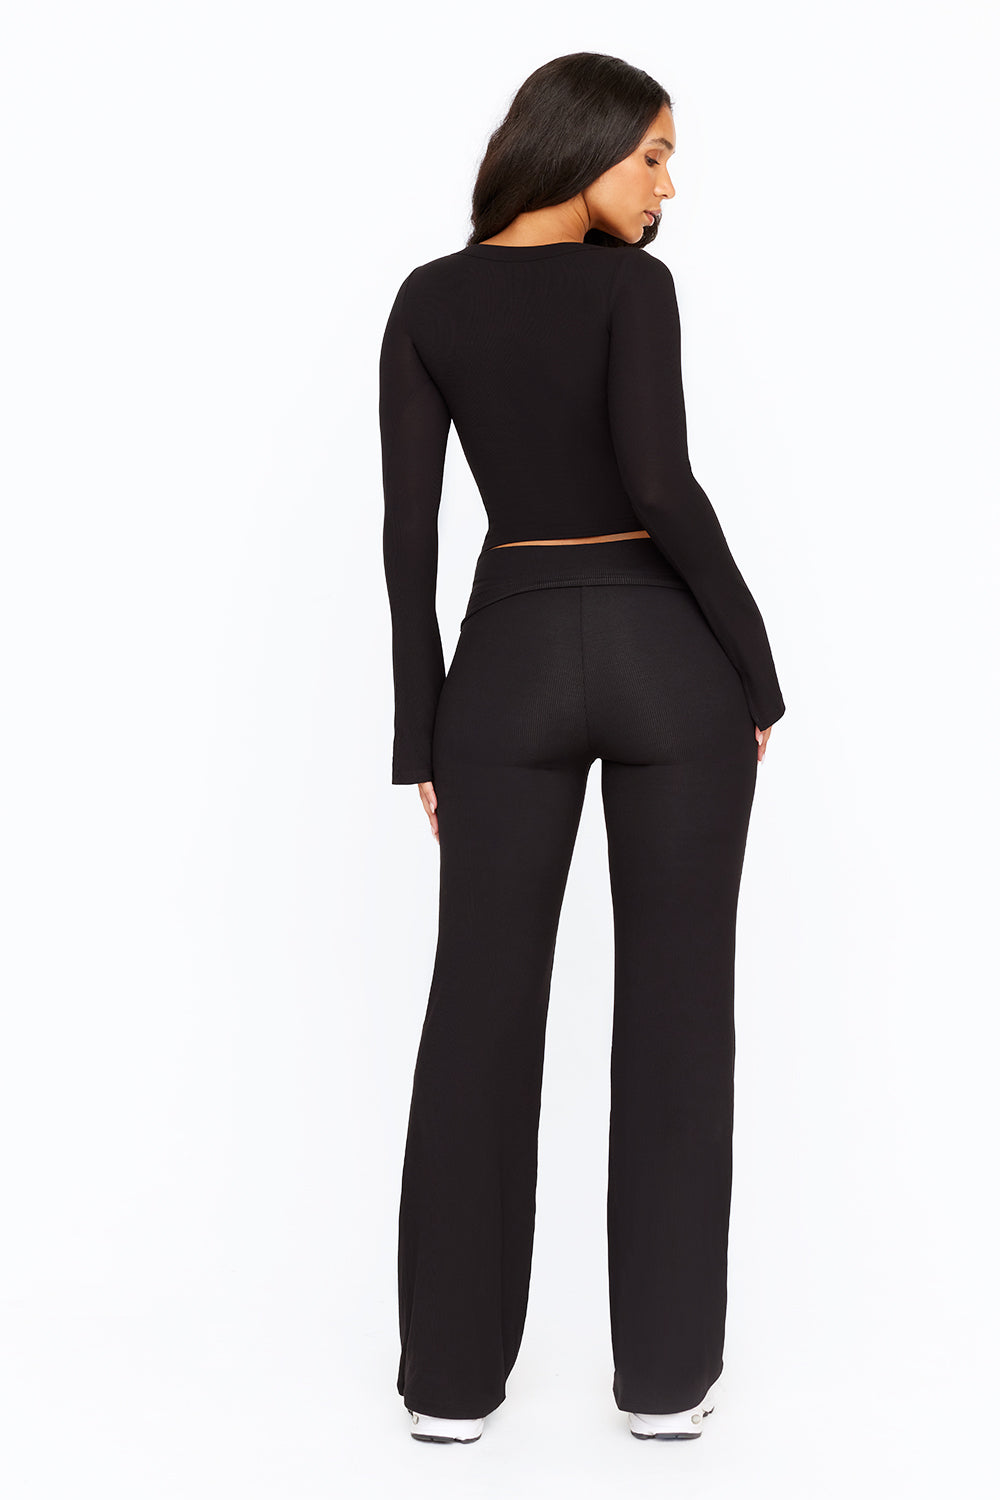 Cotton:On fleece lined full length flare trousers in black